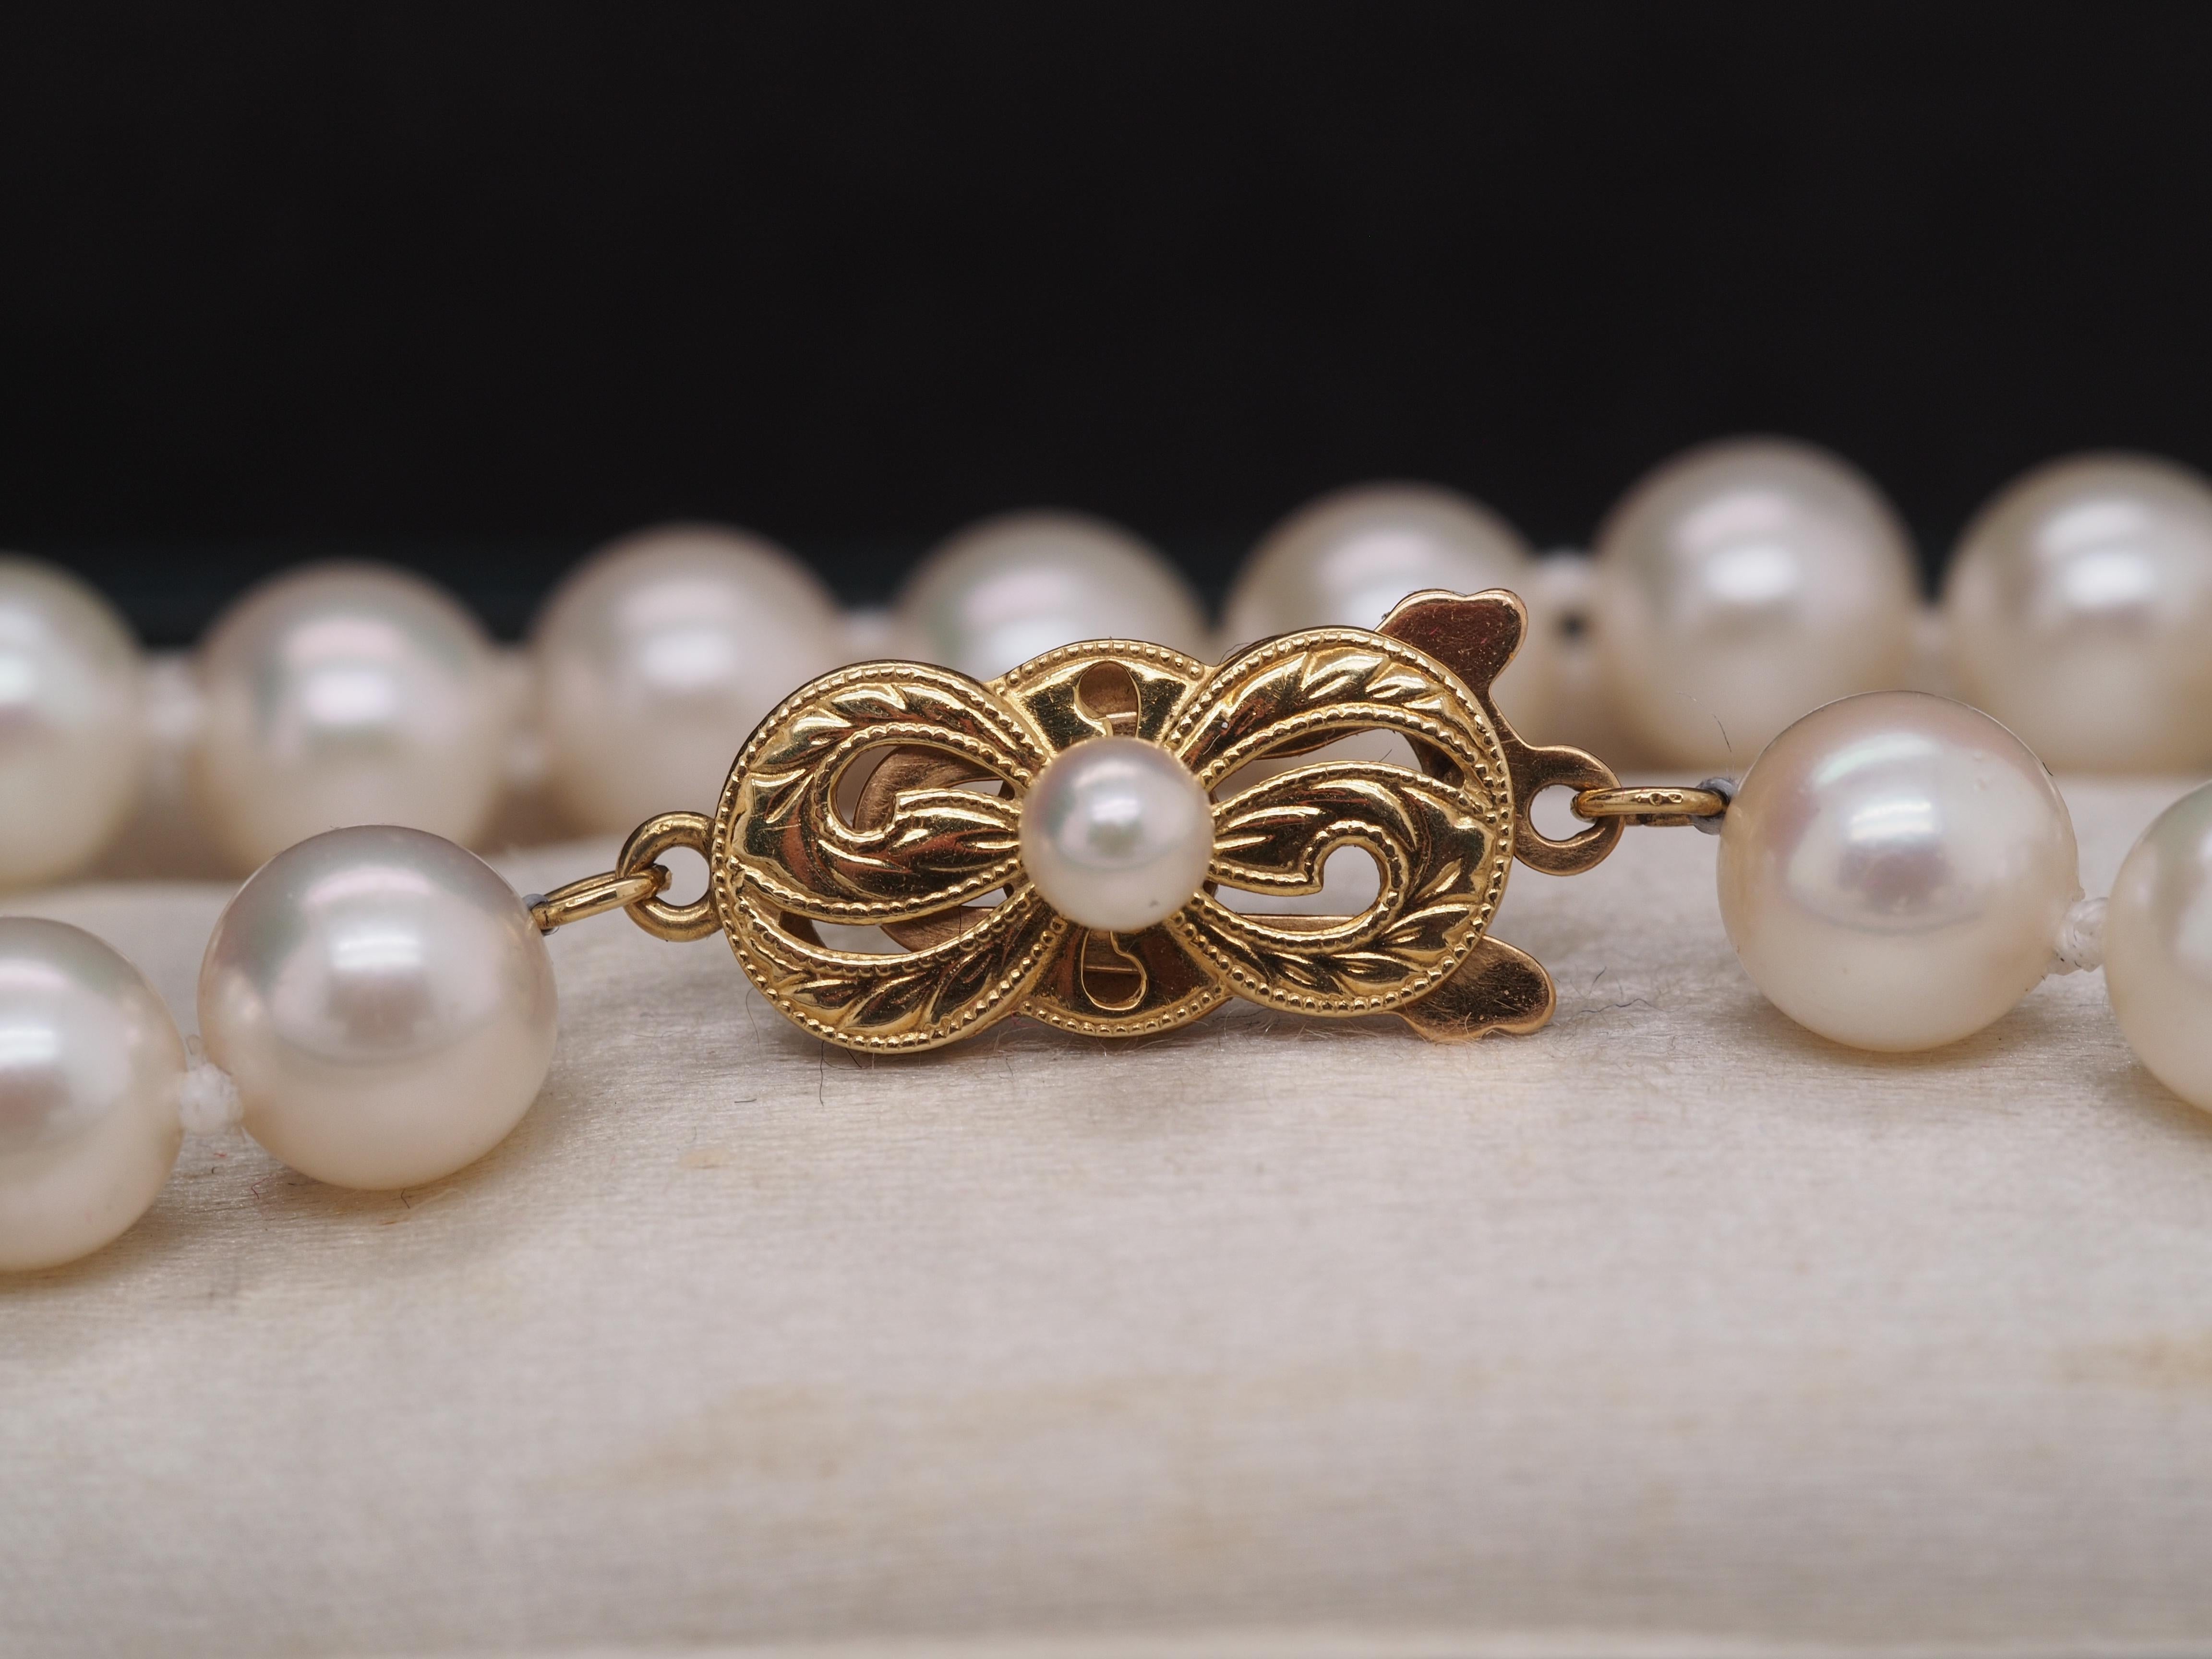 Year: 1990s
Item Details:
Metal Type: Clasp is 18K Yellow Gold [Hallmarked, and Tested]
Weight: 12.6 grams (All Items Total)
Stone Details:
Type: Pearl
Measurement: mm
Bracelet Length Measurement: 7 1/2 Inches Long
Condition: Excellent
Price: $ 1300